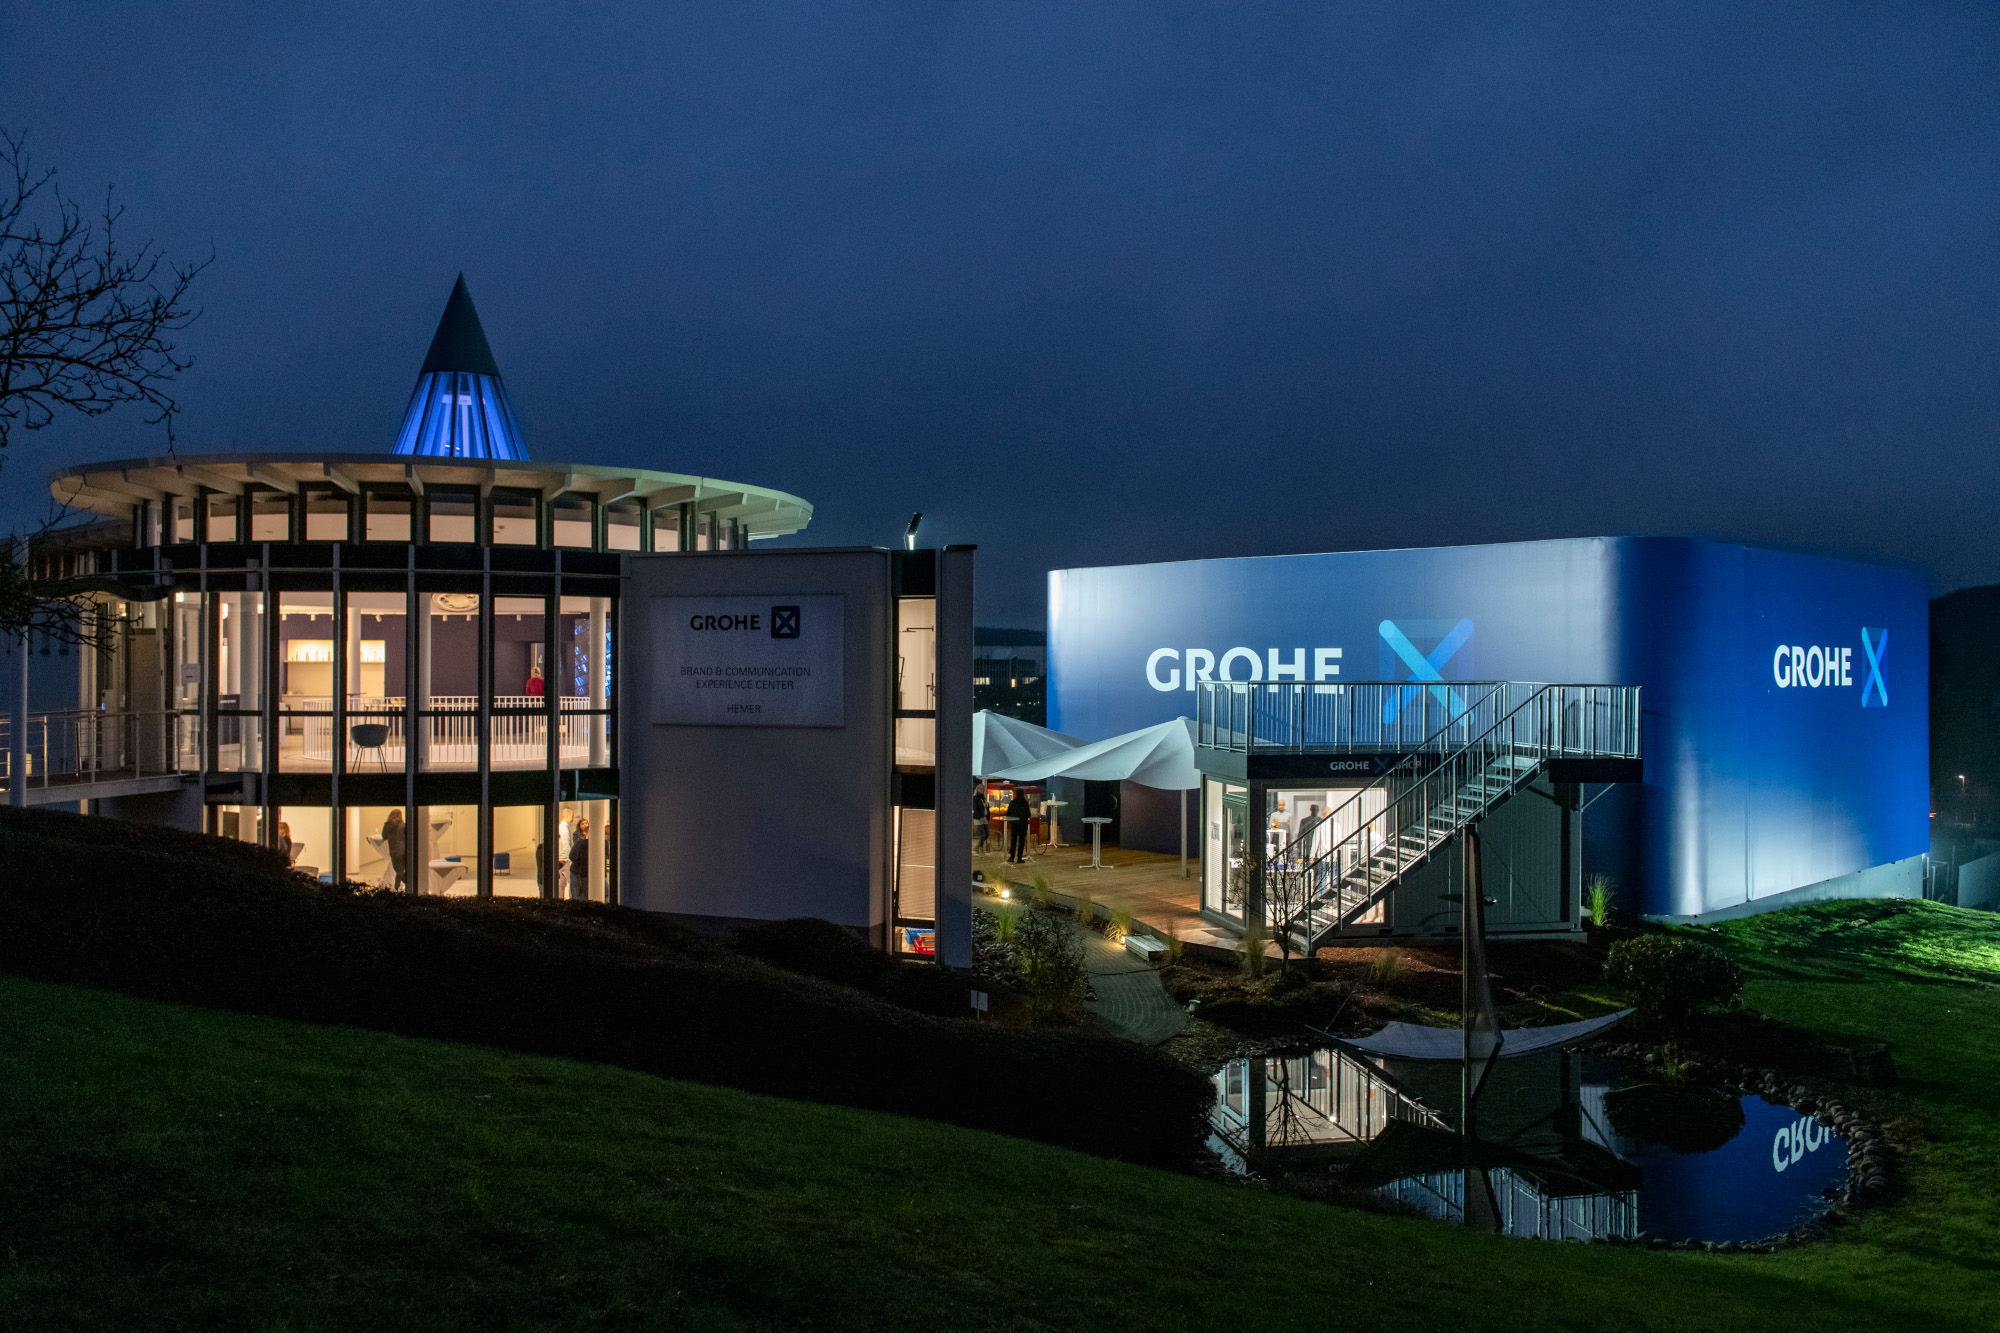 Grohe X (Fotos: Grohe AG)